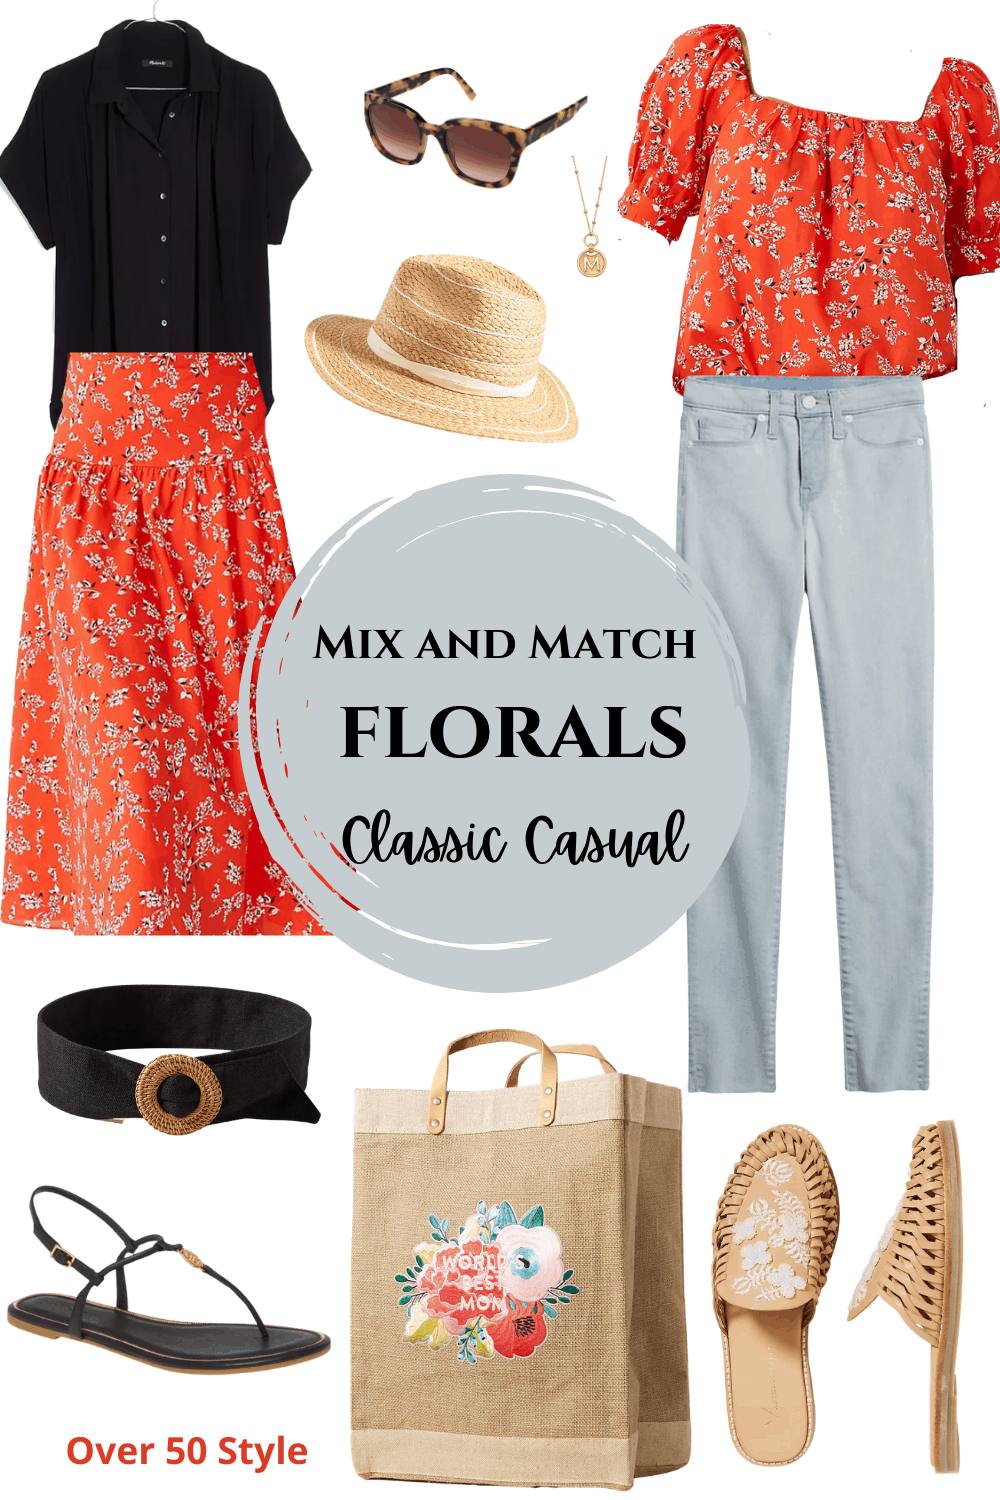 Over 50 floral outfit